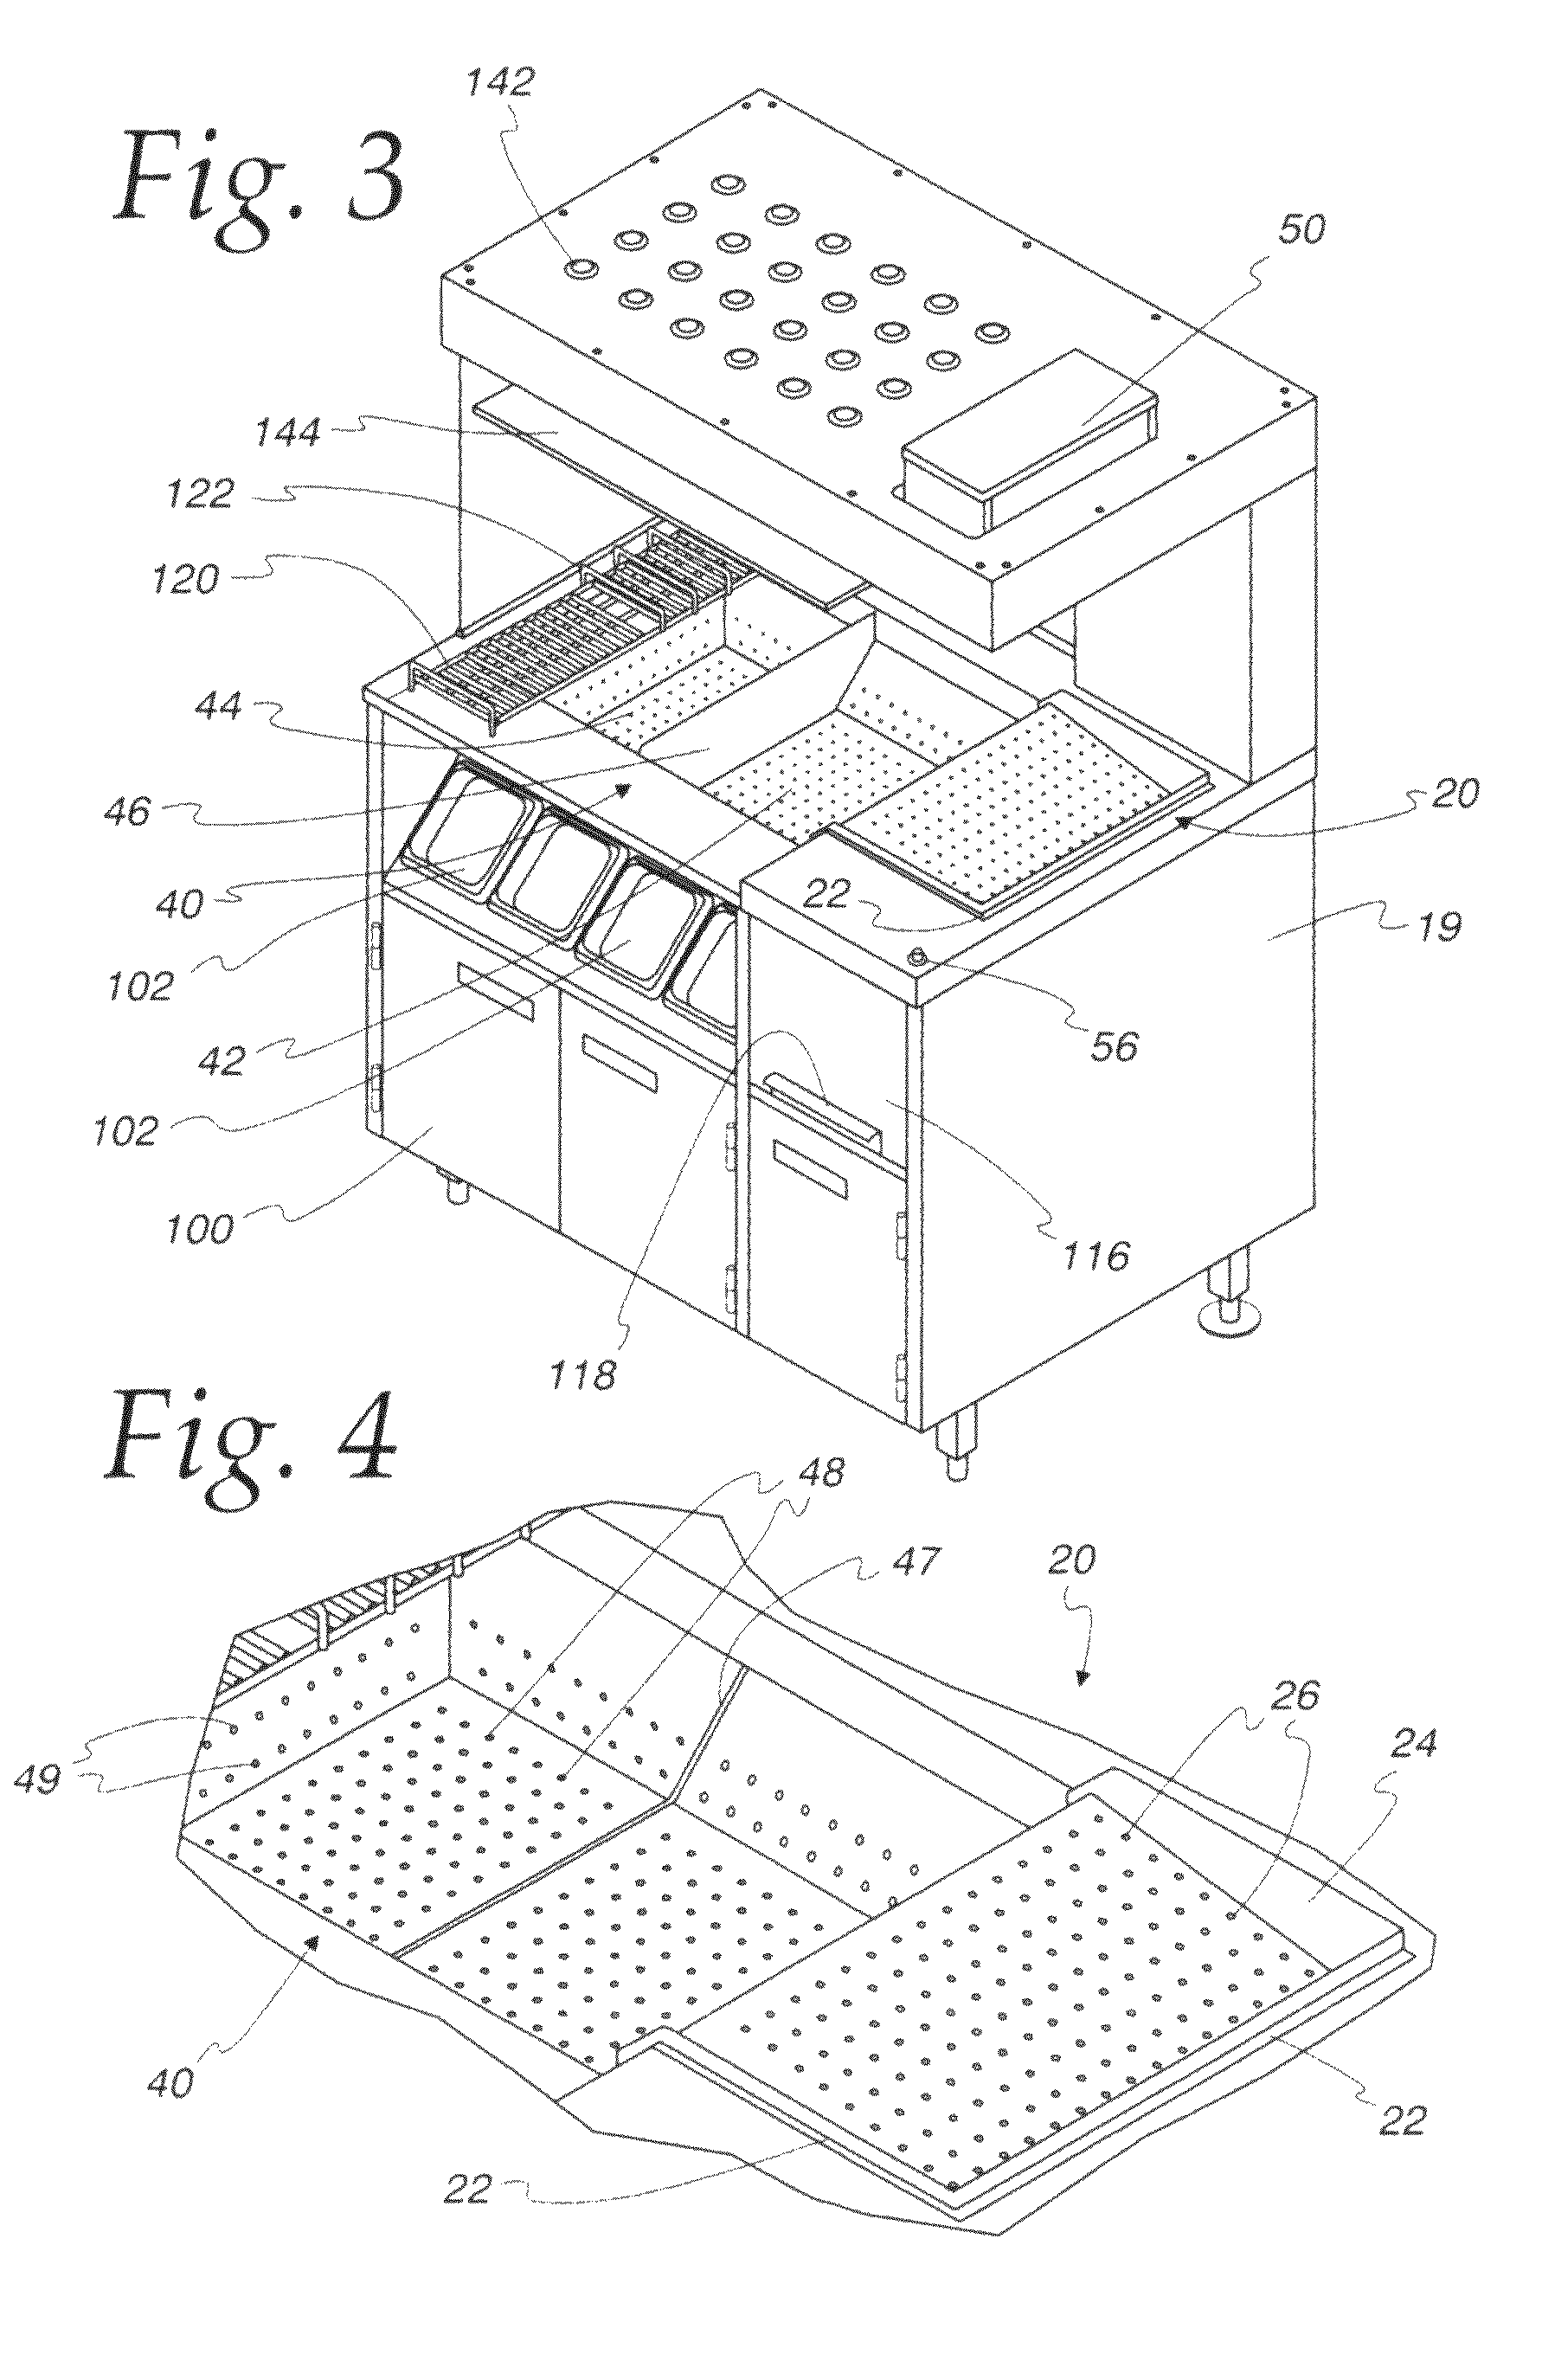 Storage and packaging of bulk food items and method